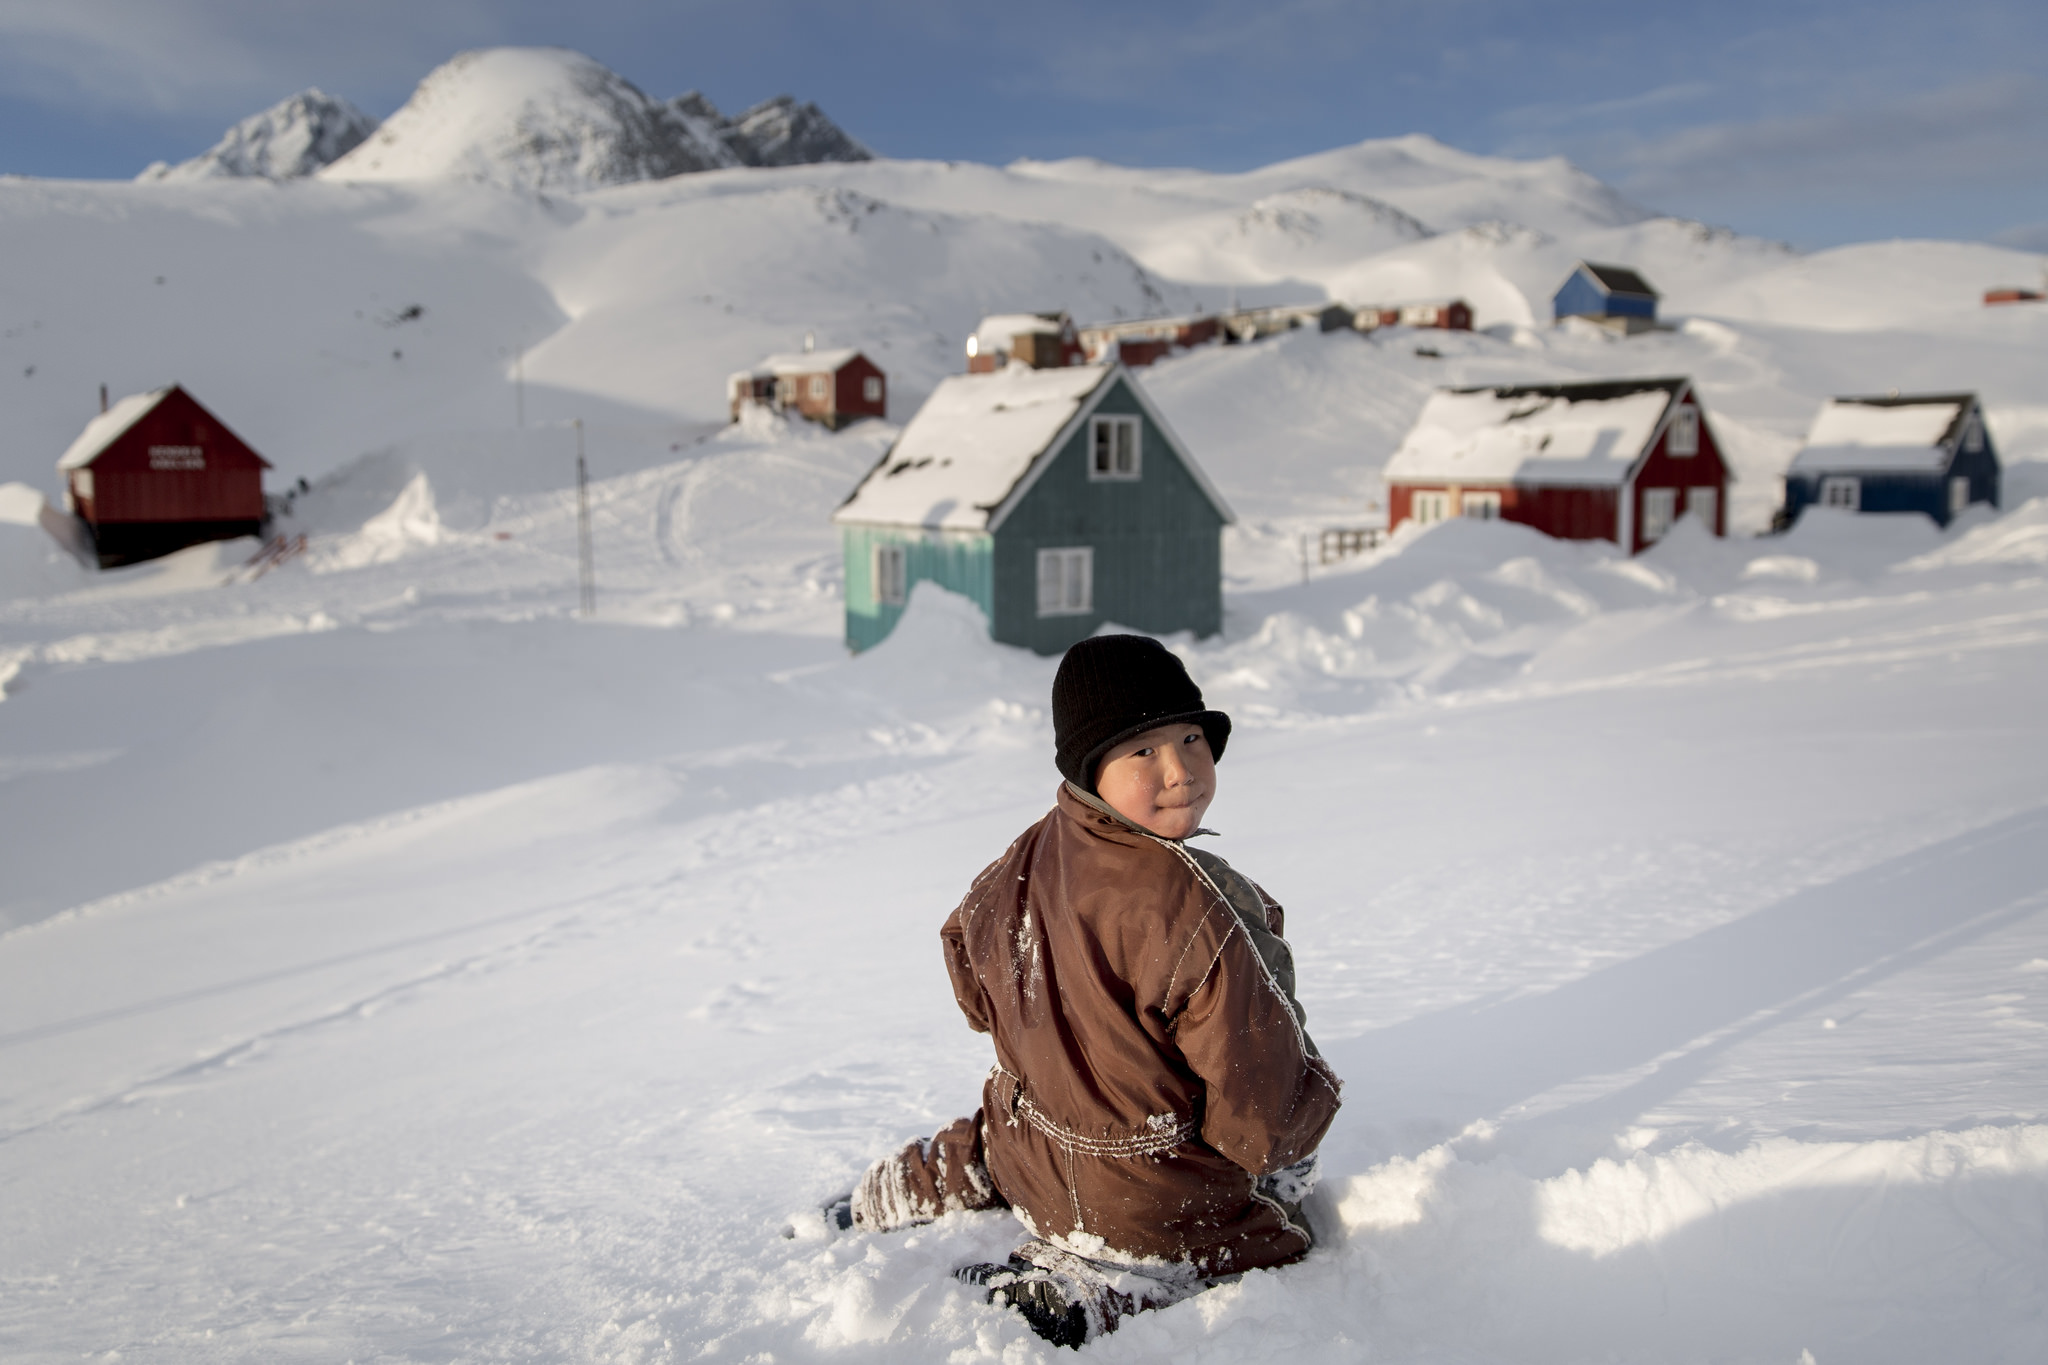 Photo from Visit Greenland ­- Mads Pihl